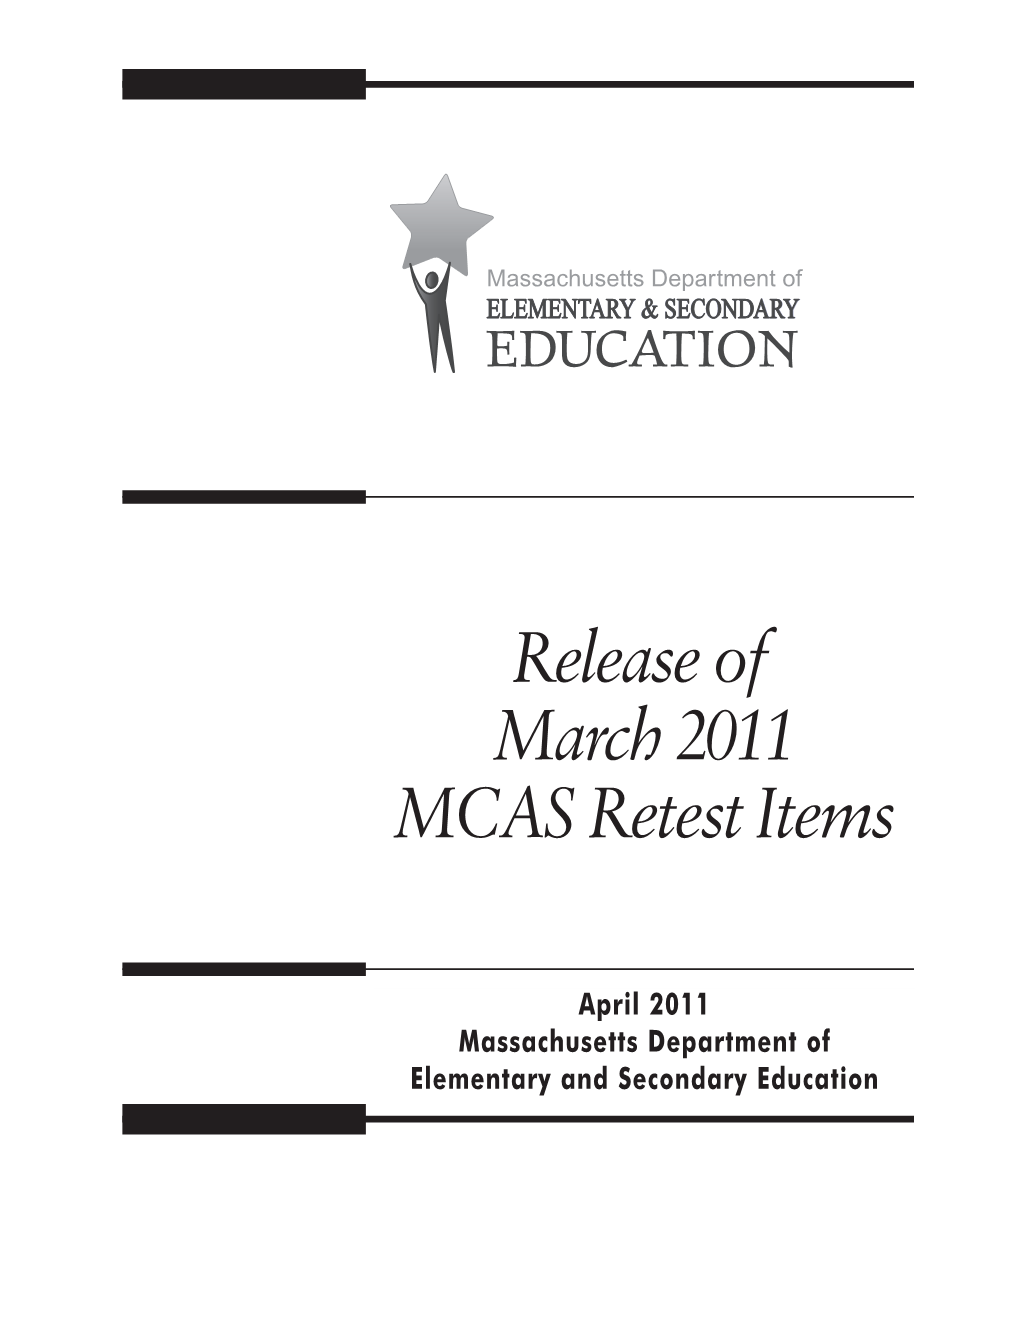 Release of March 2011 MCAS Retest Items